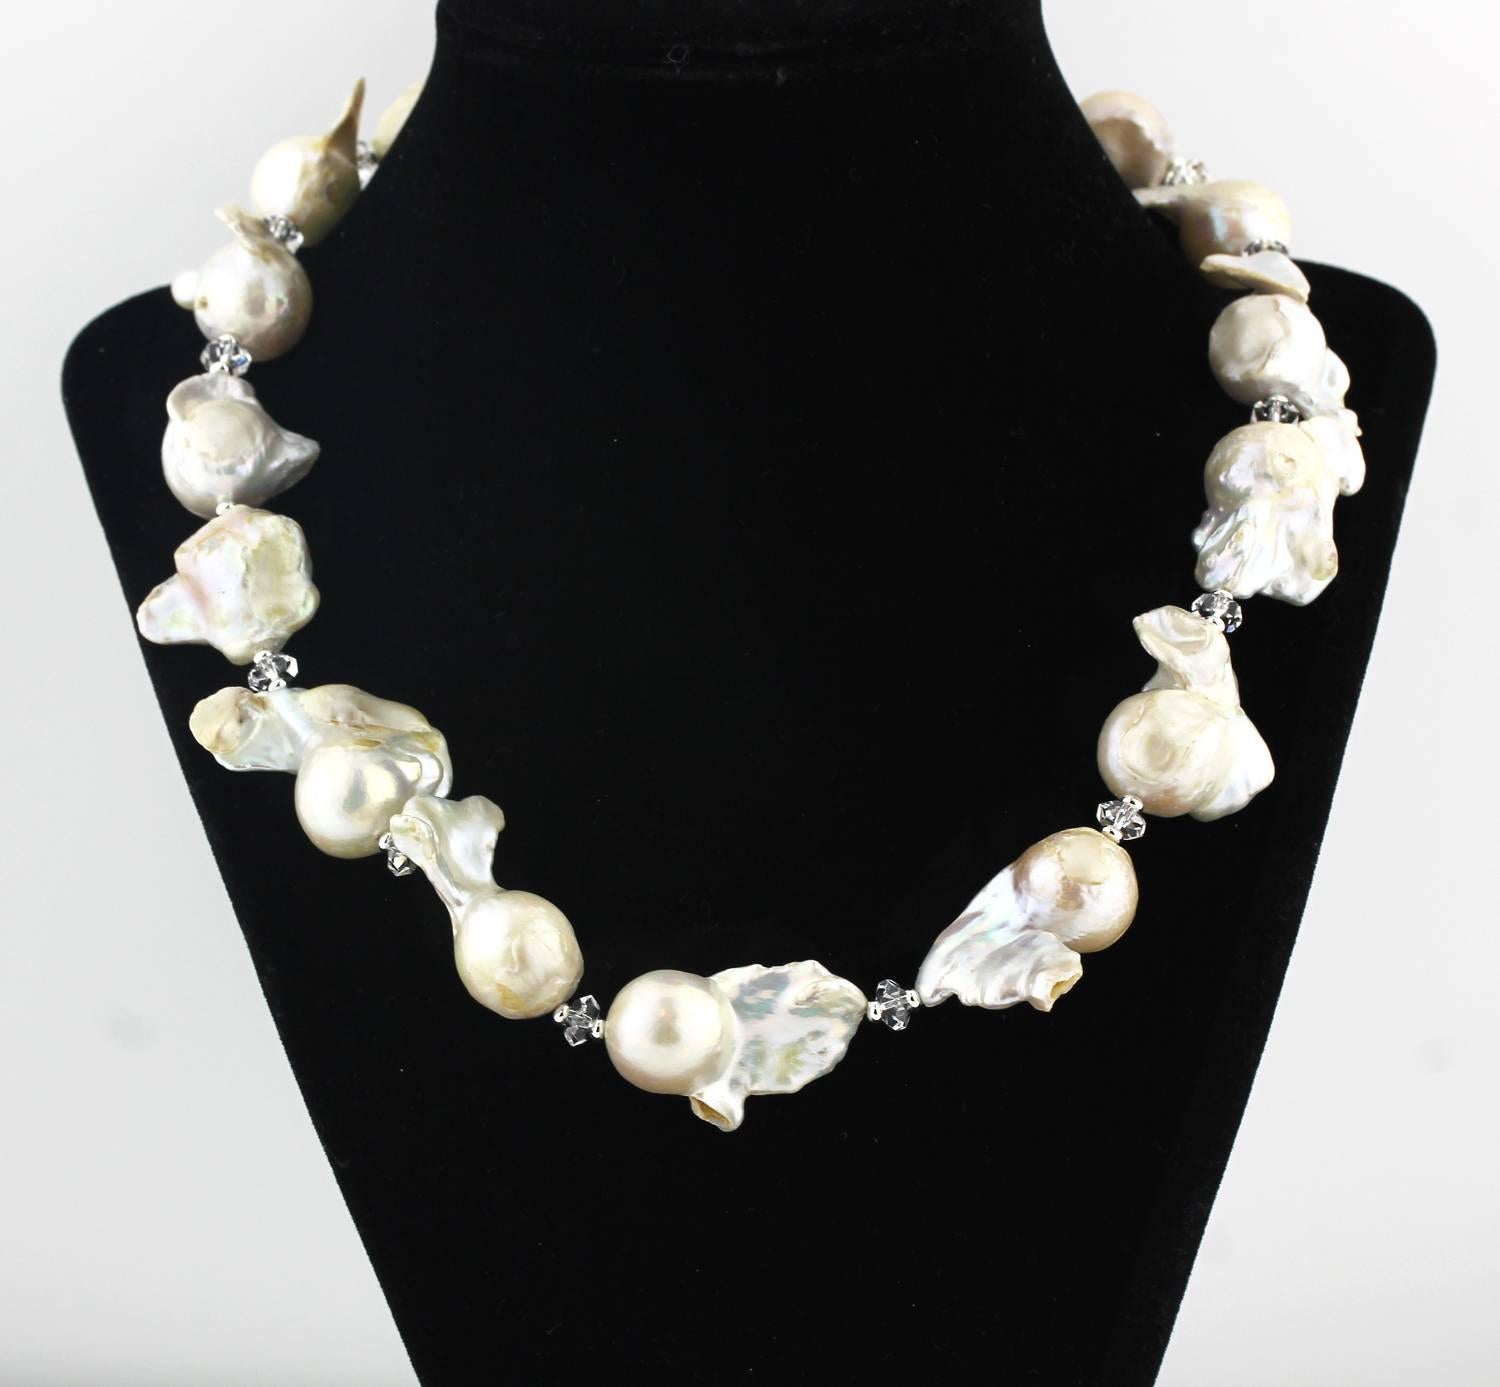 The slightly graduated huge glistening unique Baroque Pearls are enhanced by chunks of polished silver quartz gems and gemstones on this handmade necklace..  One of the Pearls glows a bit more than the others but creates more drama and beauty. 